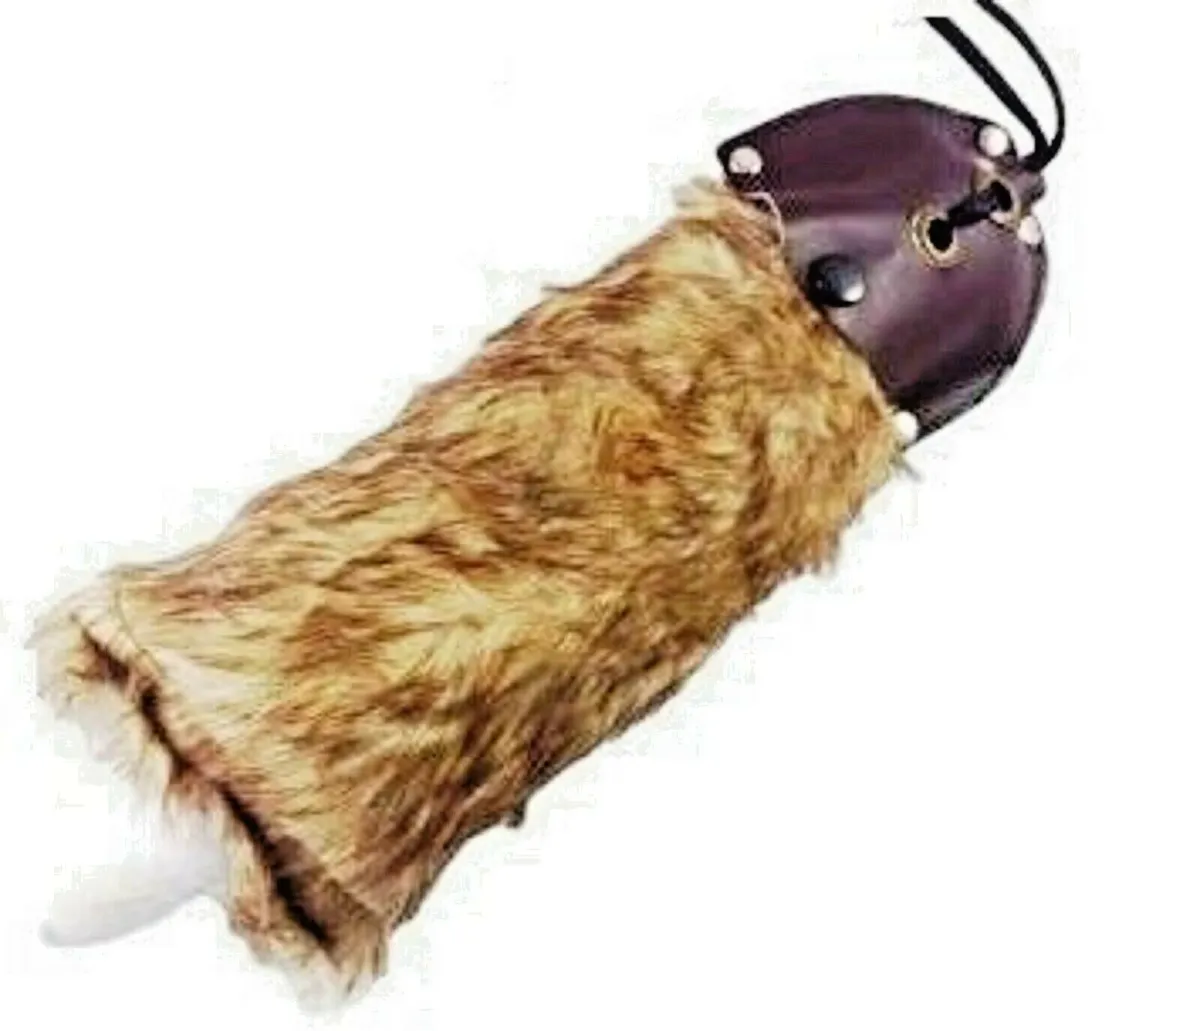 New Falconry Rabbit Lure, for Falcons and Hawks Training, Discounted Price.